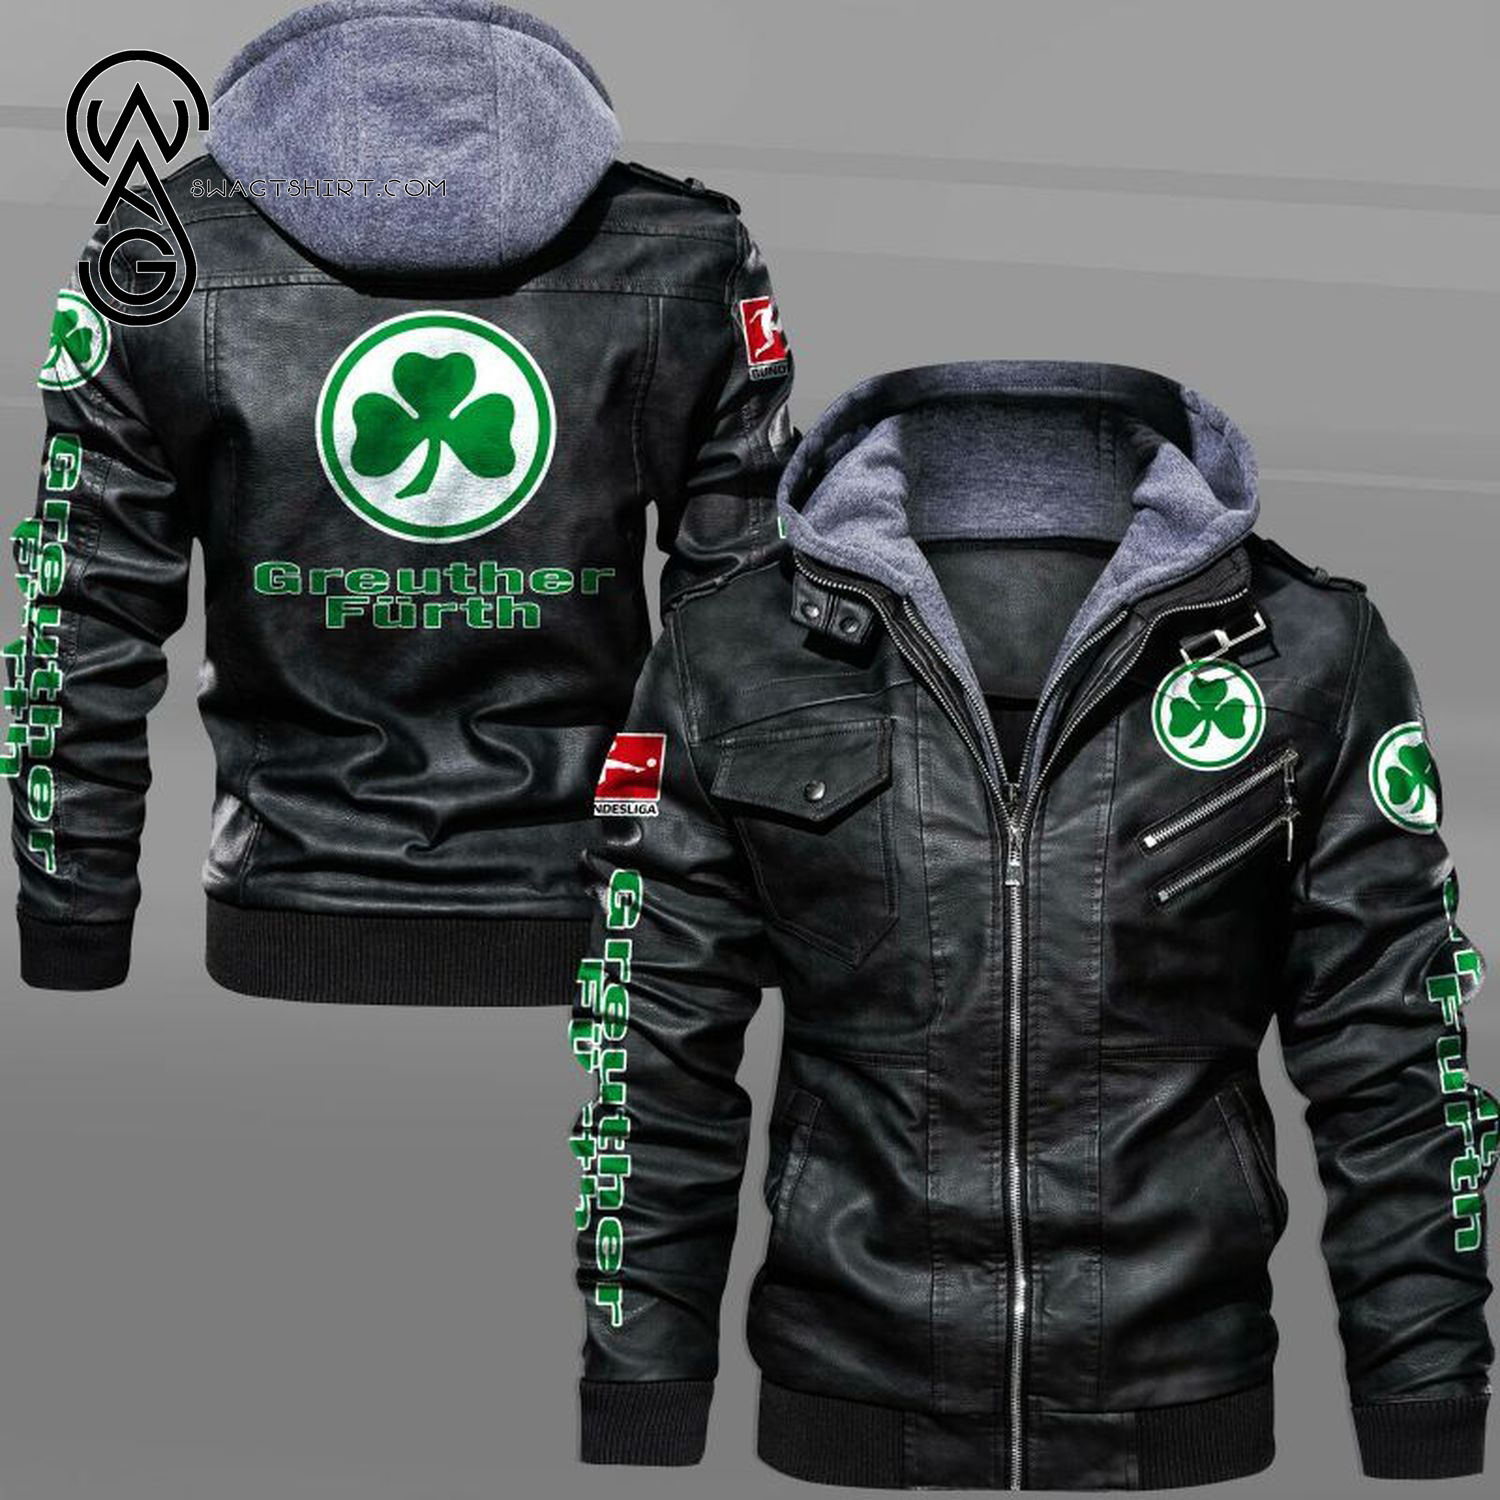 SpVgg Greuther Furth Football Club Leather Jacket